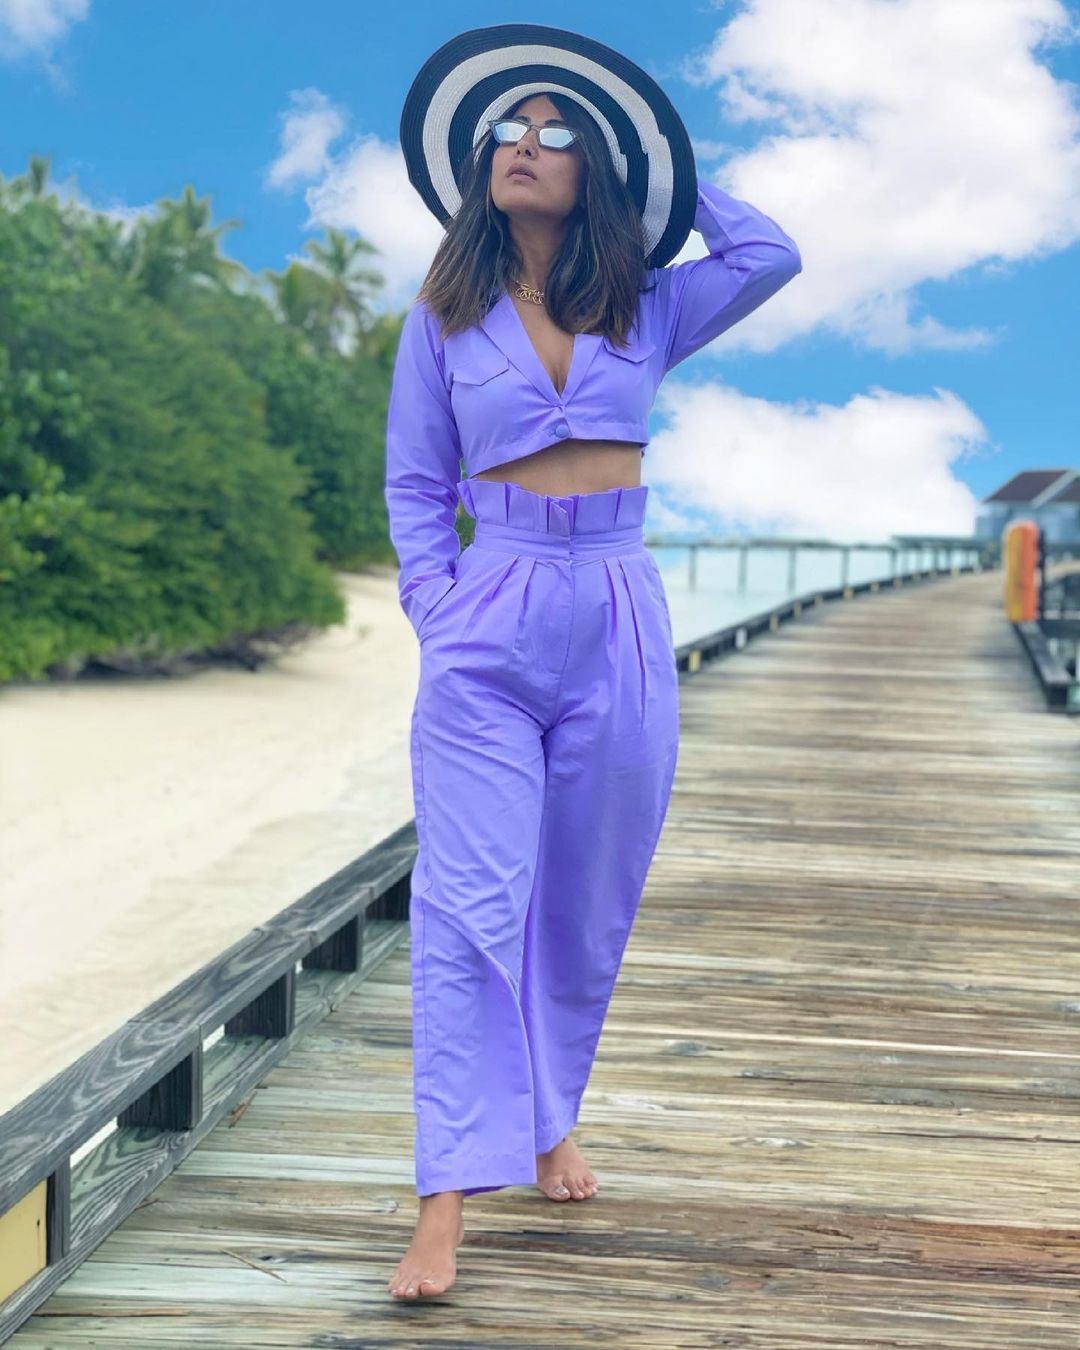 purple outfit of hina